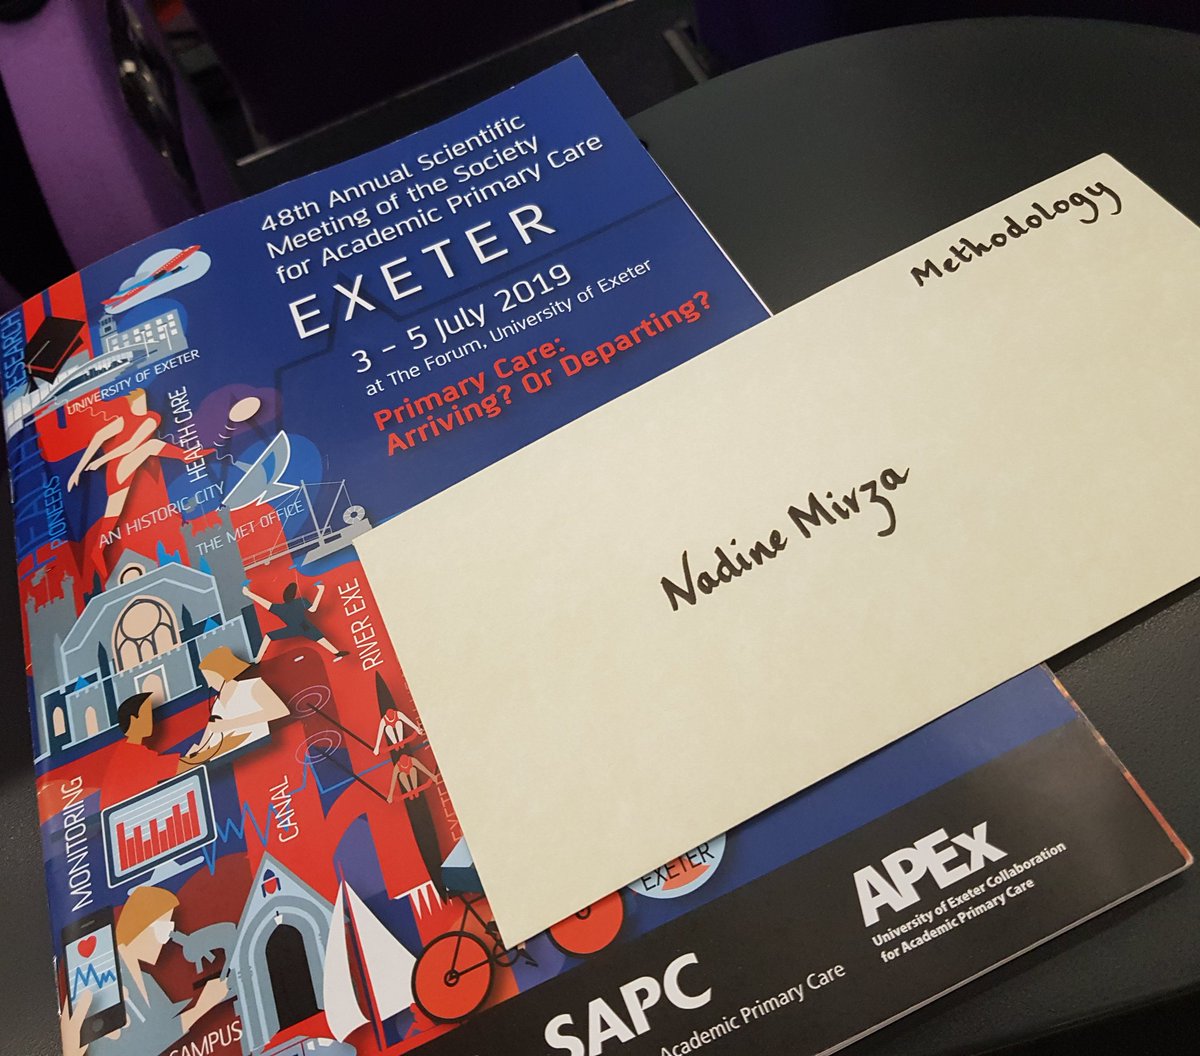 Thank you so much #sapcasm for my best #methodology prize- absolutely elated! Had a wonderful time at the conference & socials & learnt so much from the amazing line up that I'll take away from in the long term. Just had the best time these last 3 days!
@PrimaryCareMcr @sapcacuk